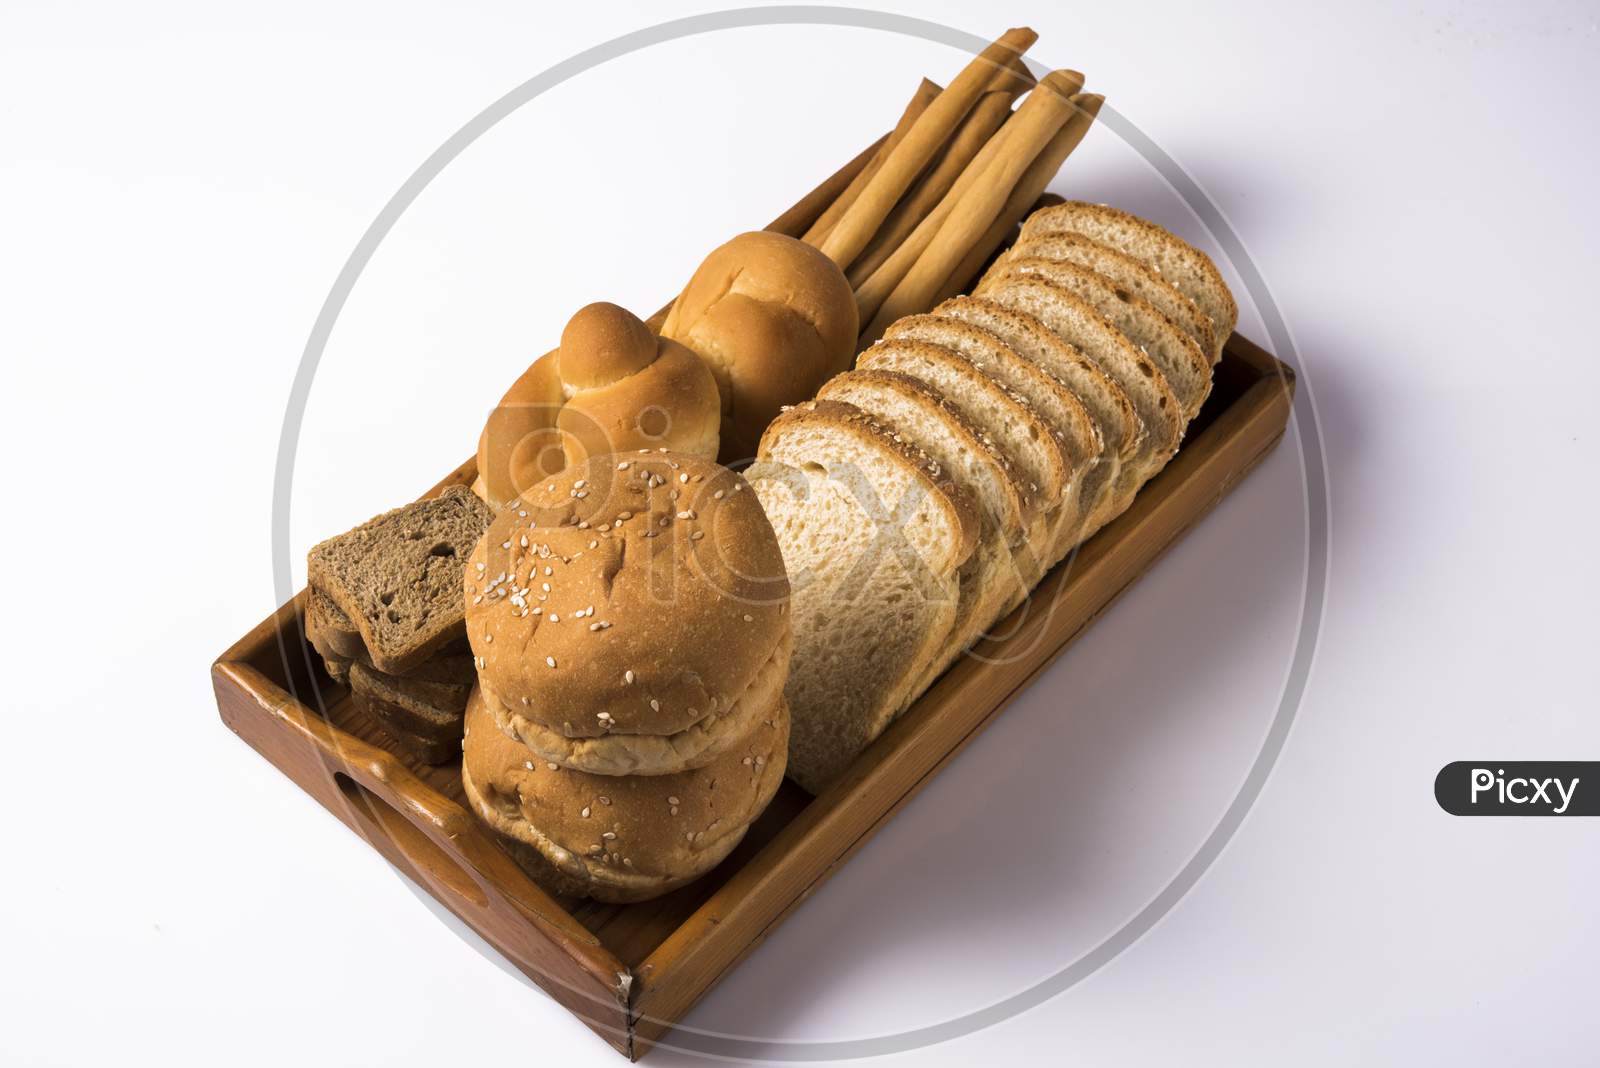 Variety of assorted fresh bread from bakery, served in a basket / tray